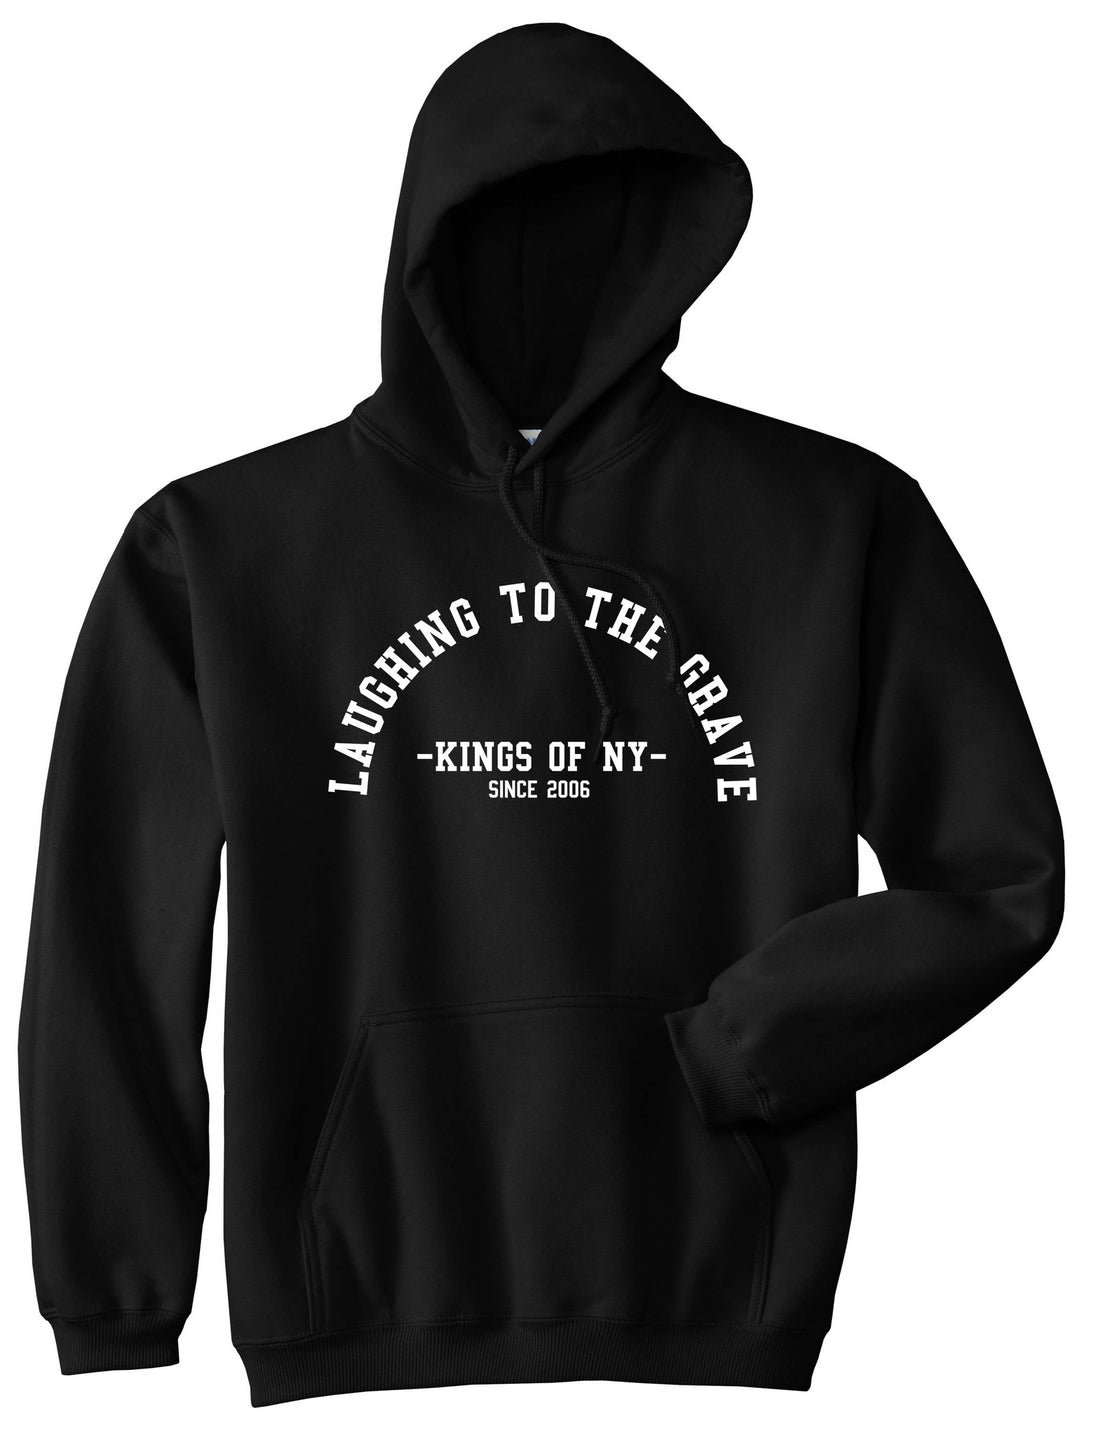 Laughing To The Grave Skull 2006 Pullover Hoodie in Black By Kings Of NY